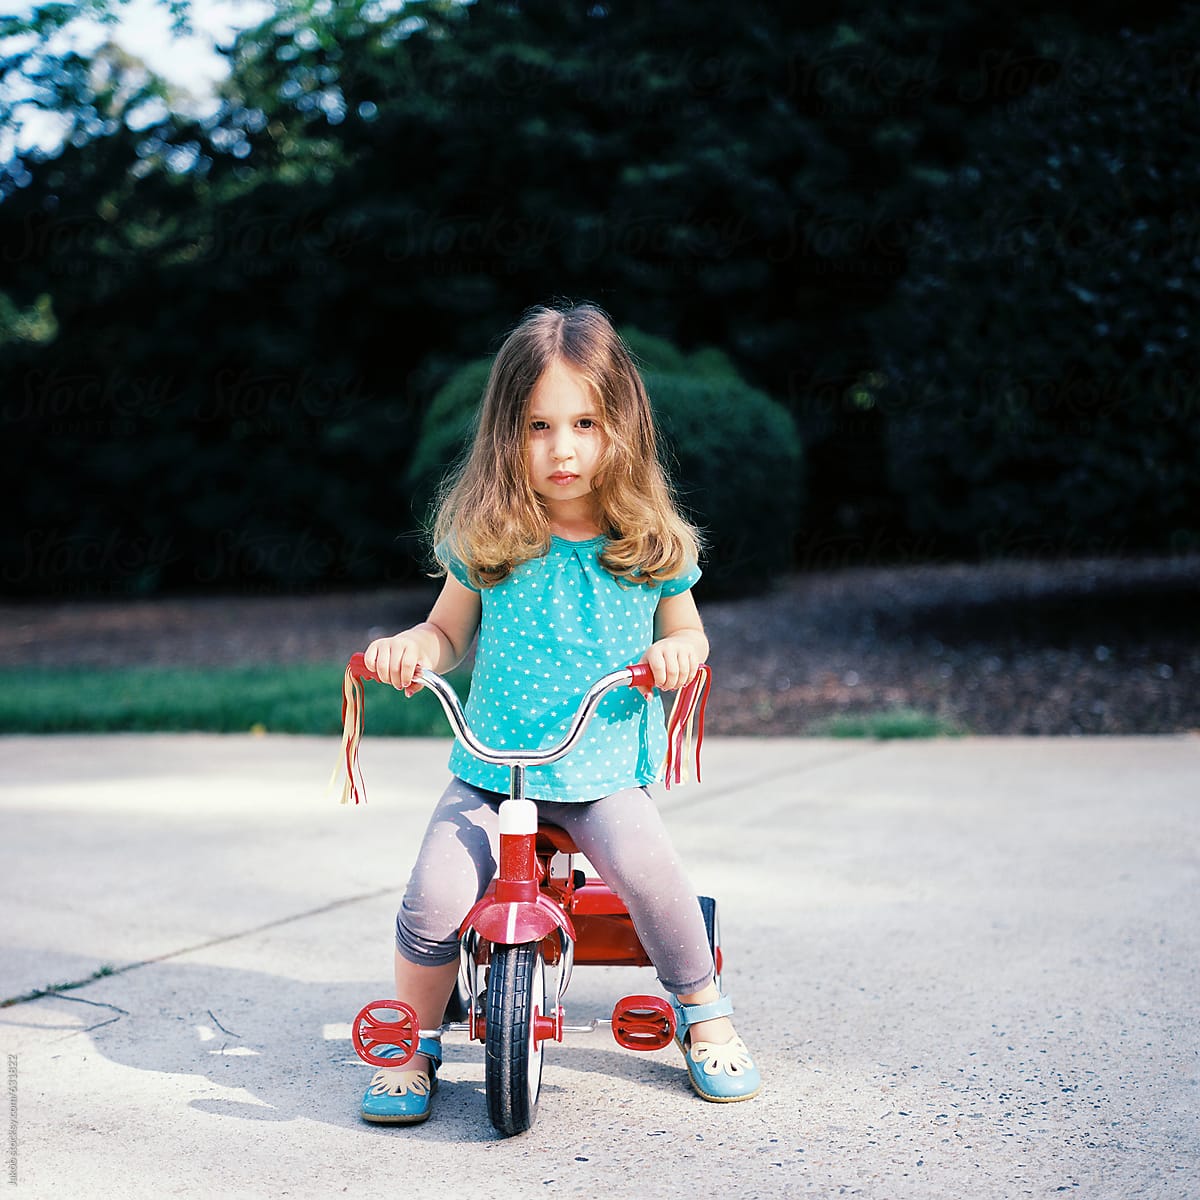 Beautiful Young Girl Sitting On A Tricycle By Stocksy Contributor Jakob Lagerstedt Stocksy 